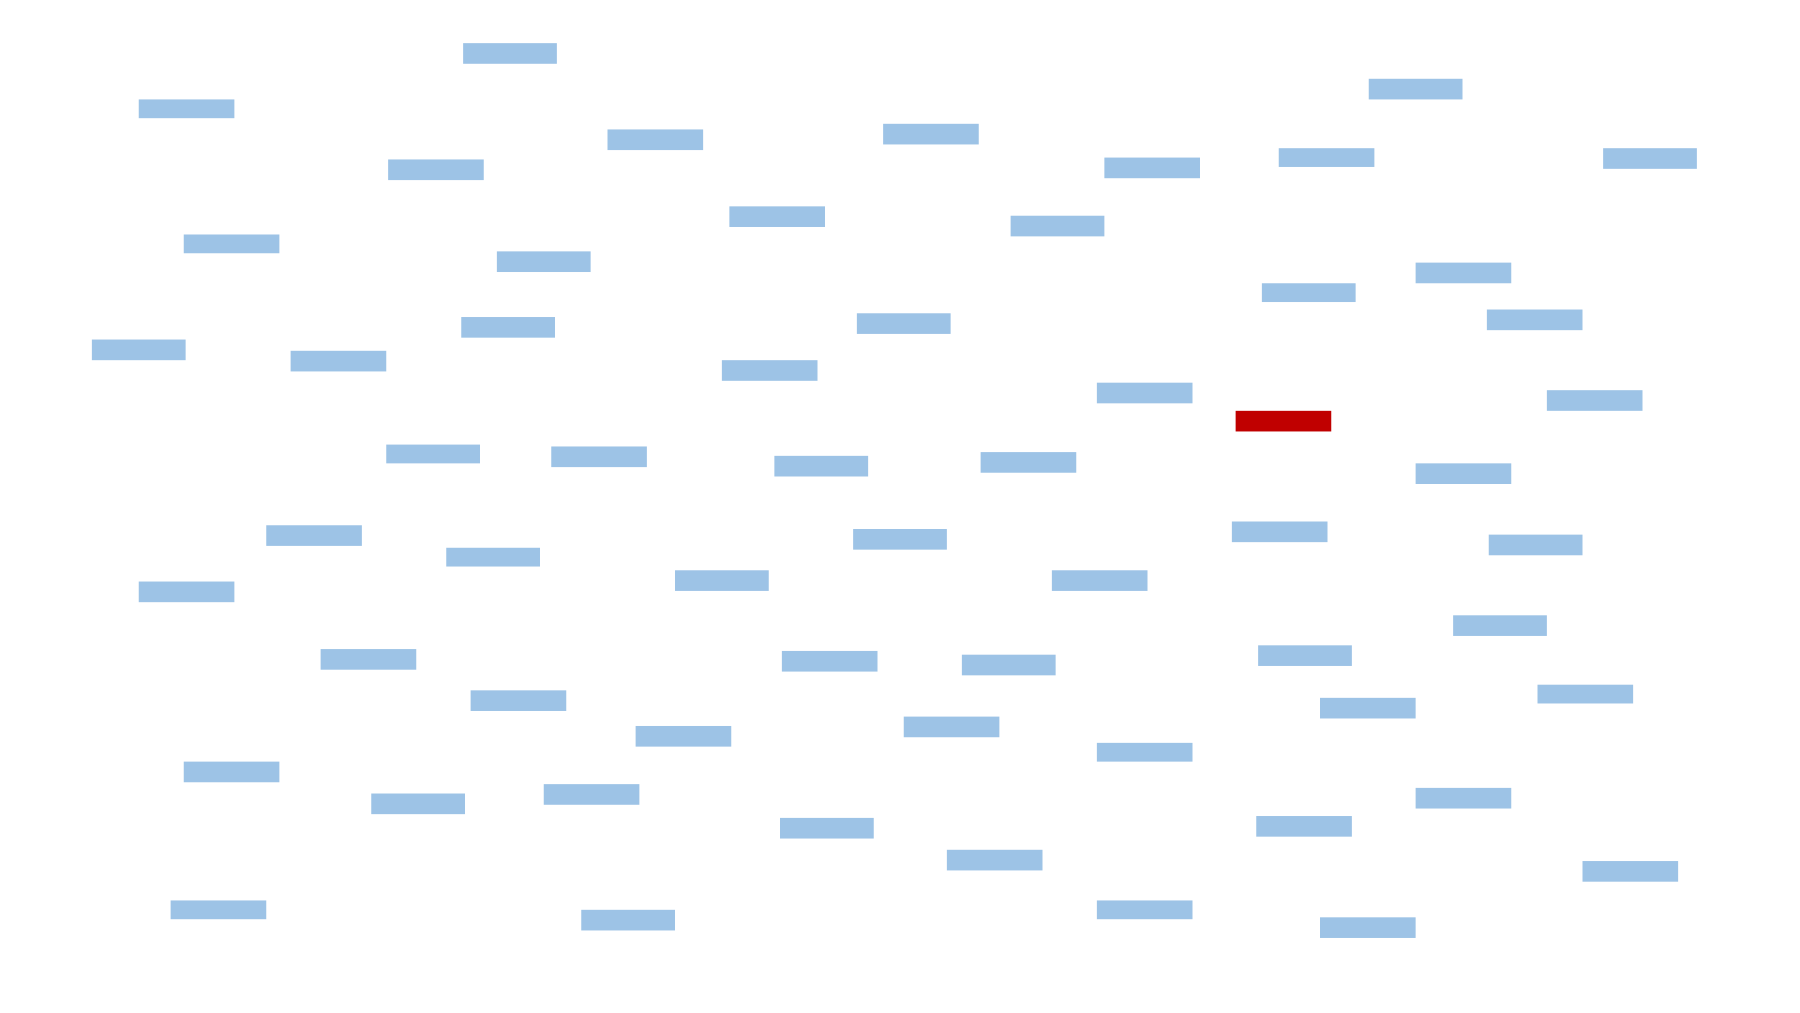 One red bar in a field of blue bars.